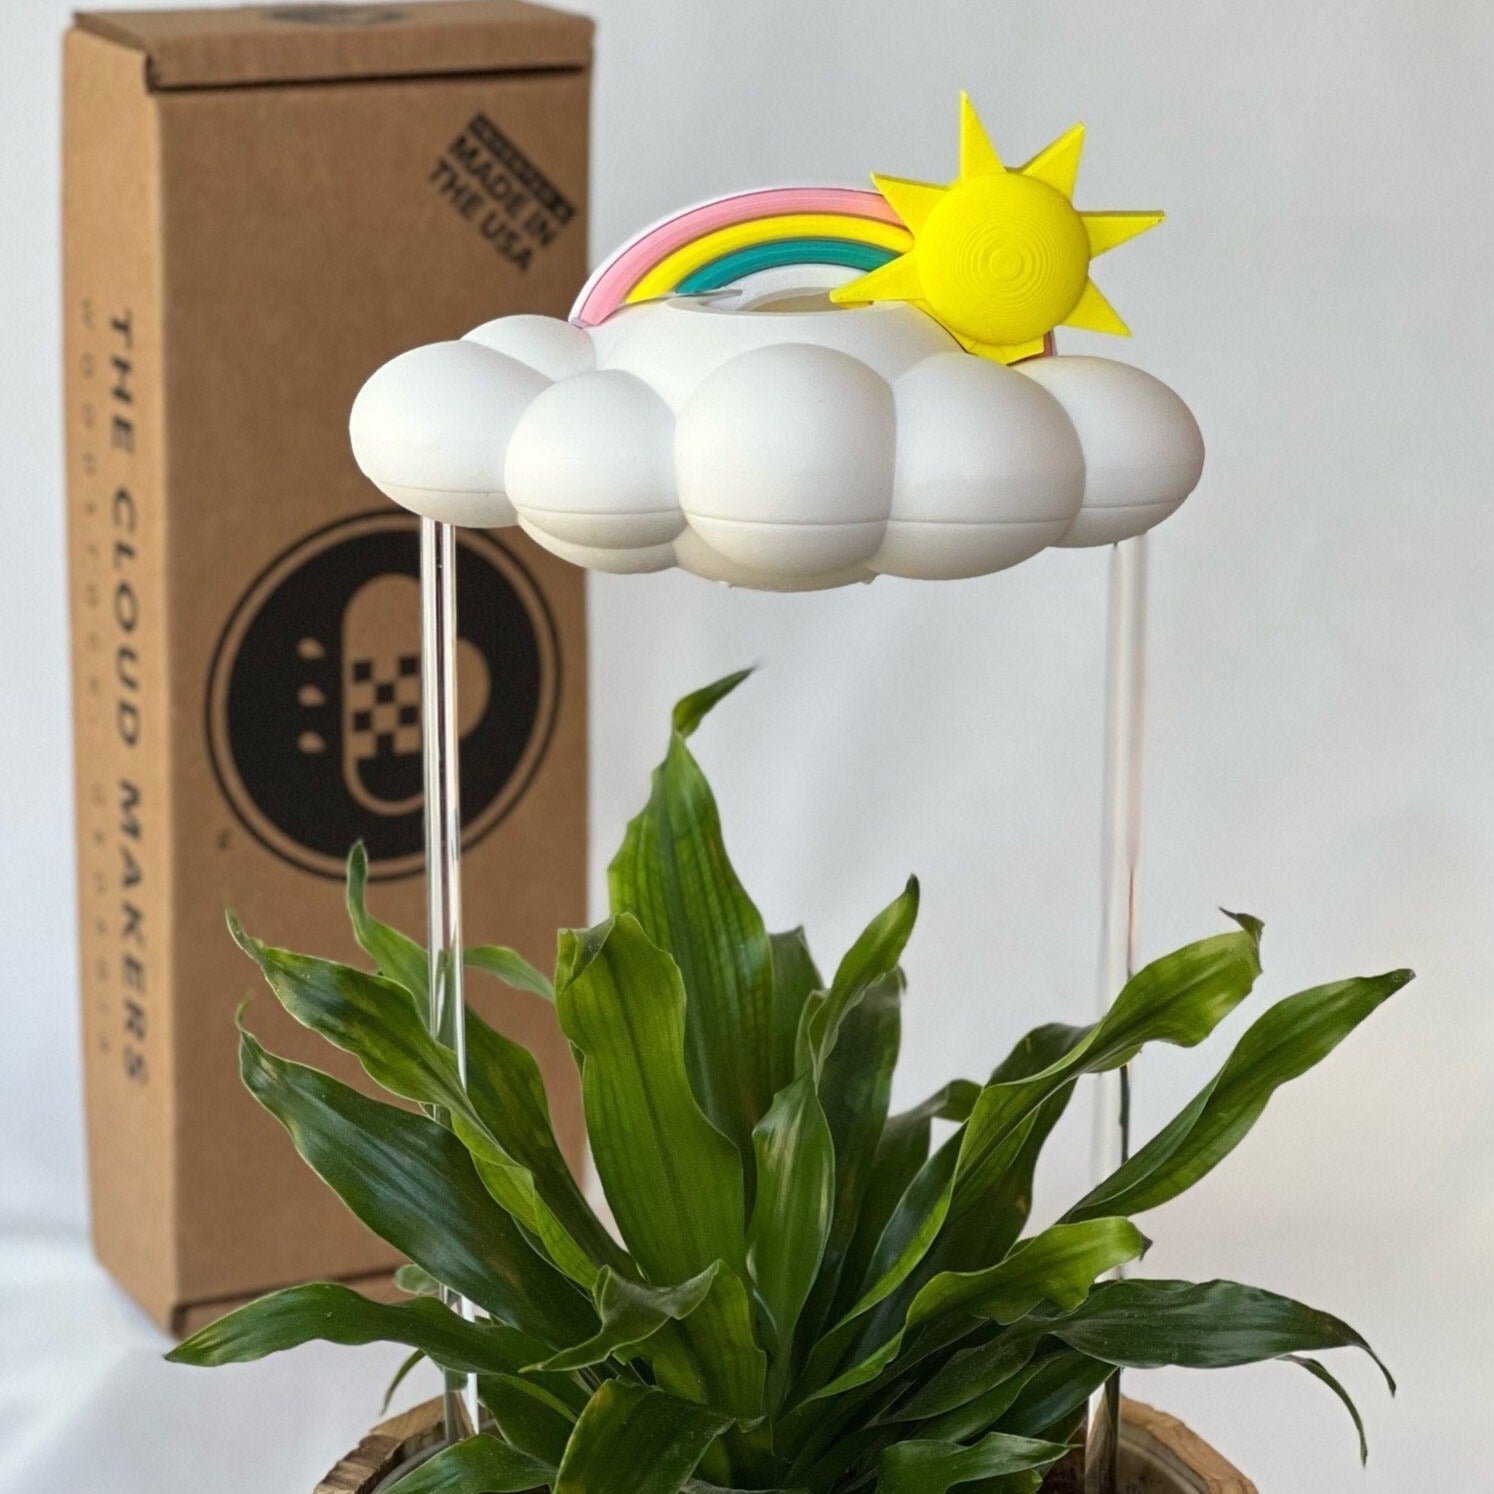 Original Dripping Rain Cloud by THE CLOUD MAKERS with Sun and Pastel Rainbow Charms